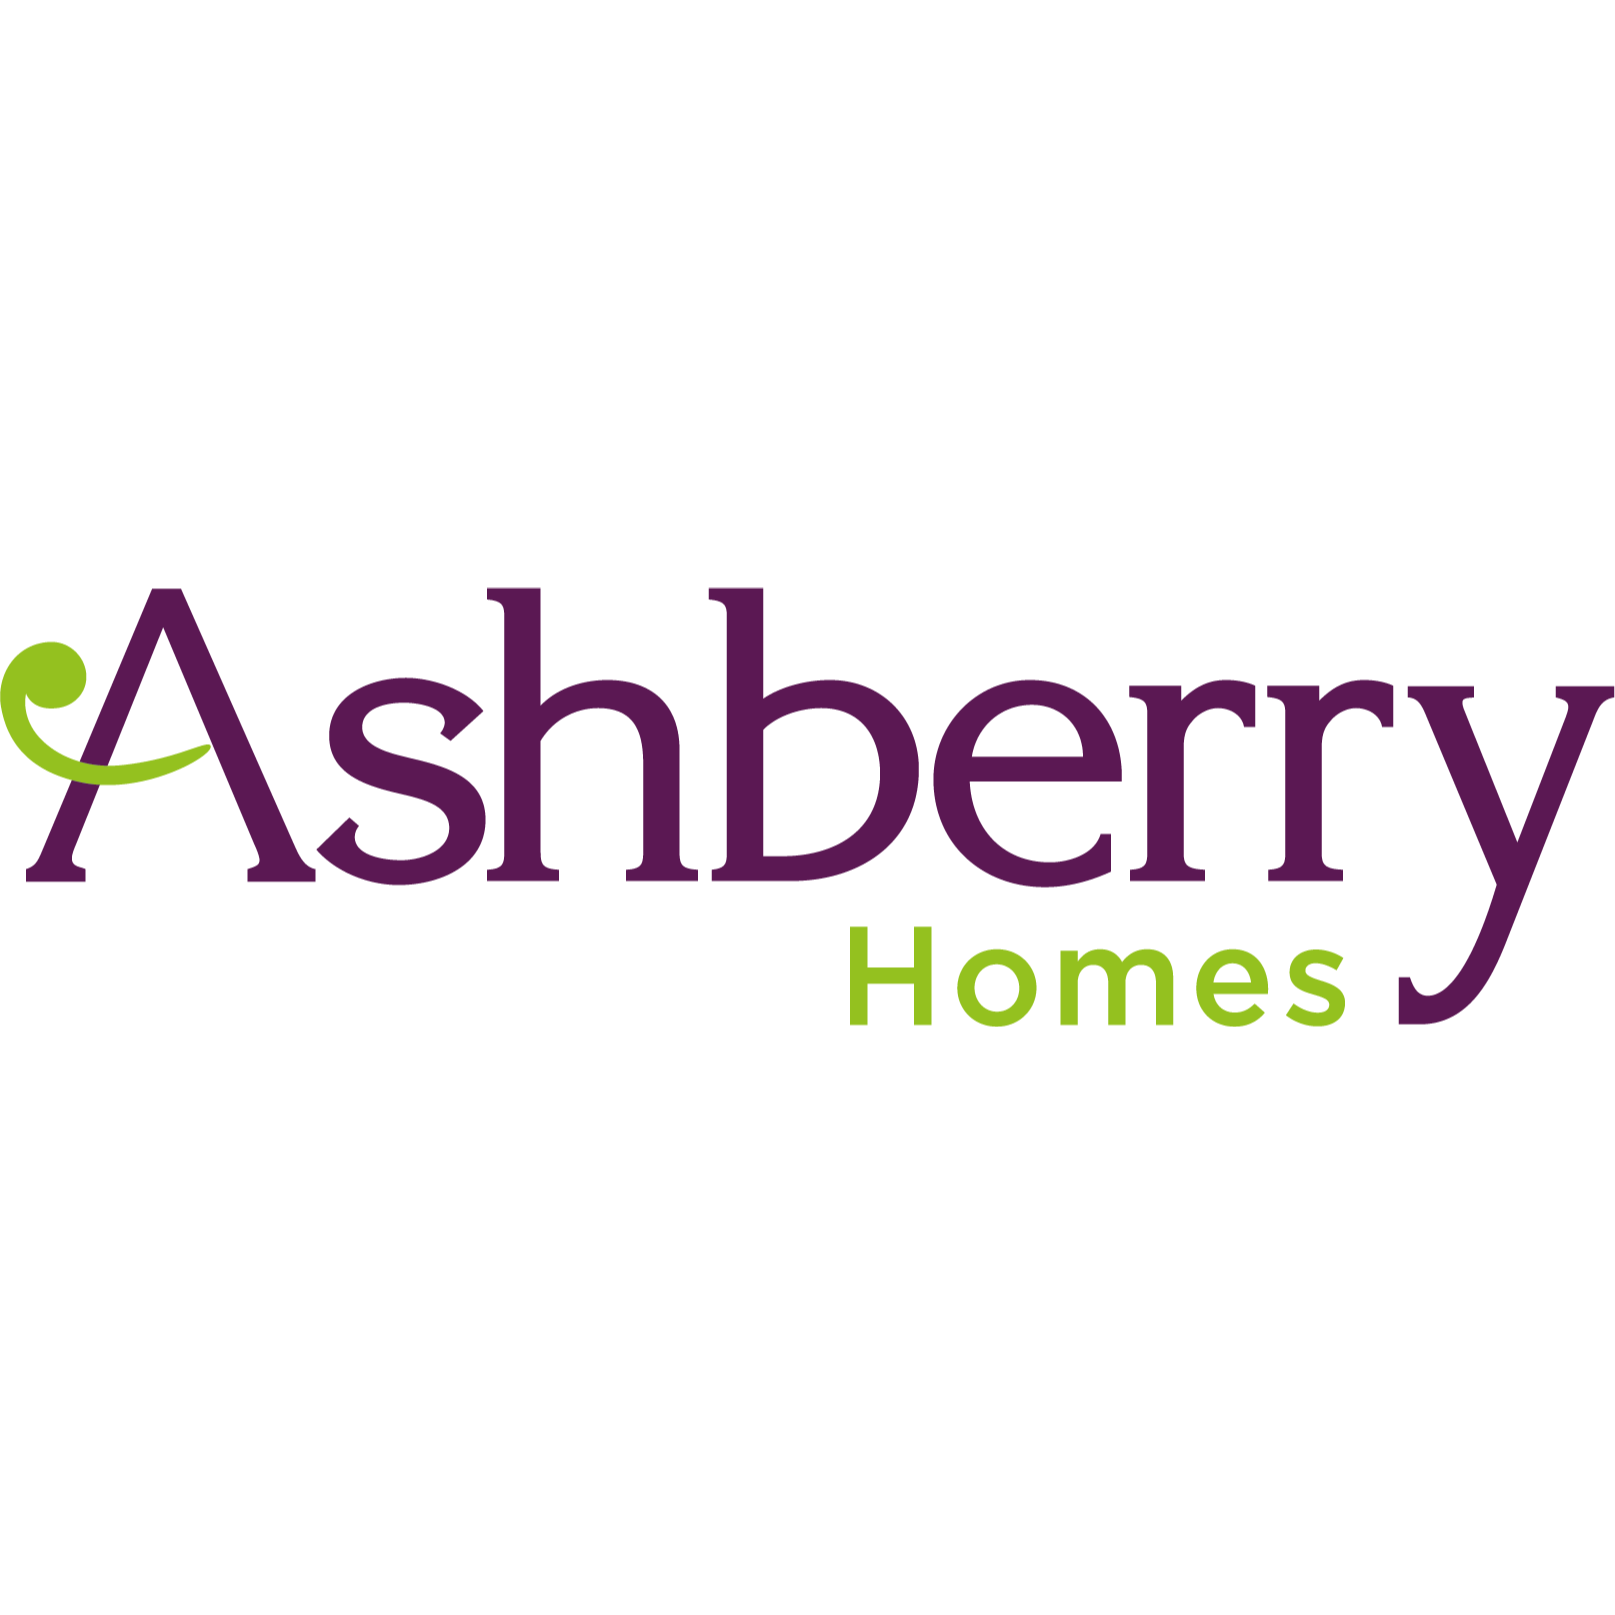 Ashberry Homes - The Academy Logo